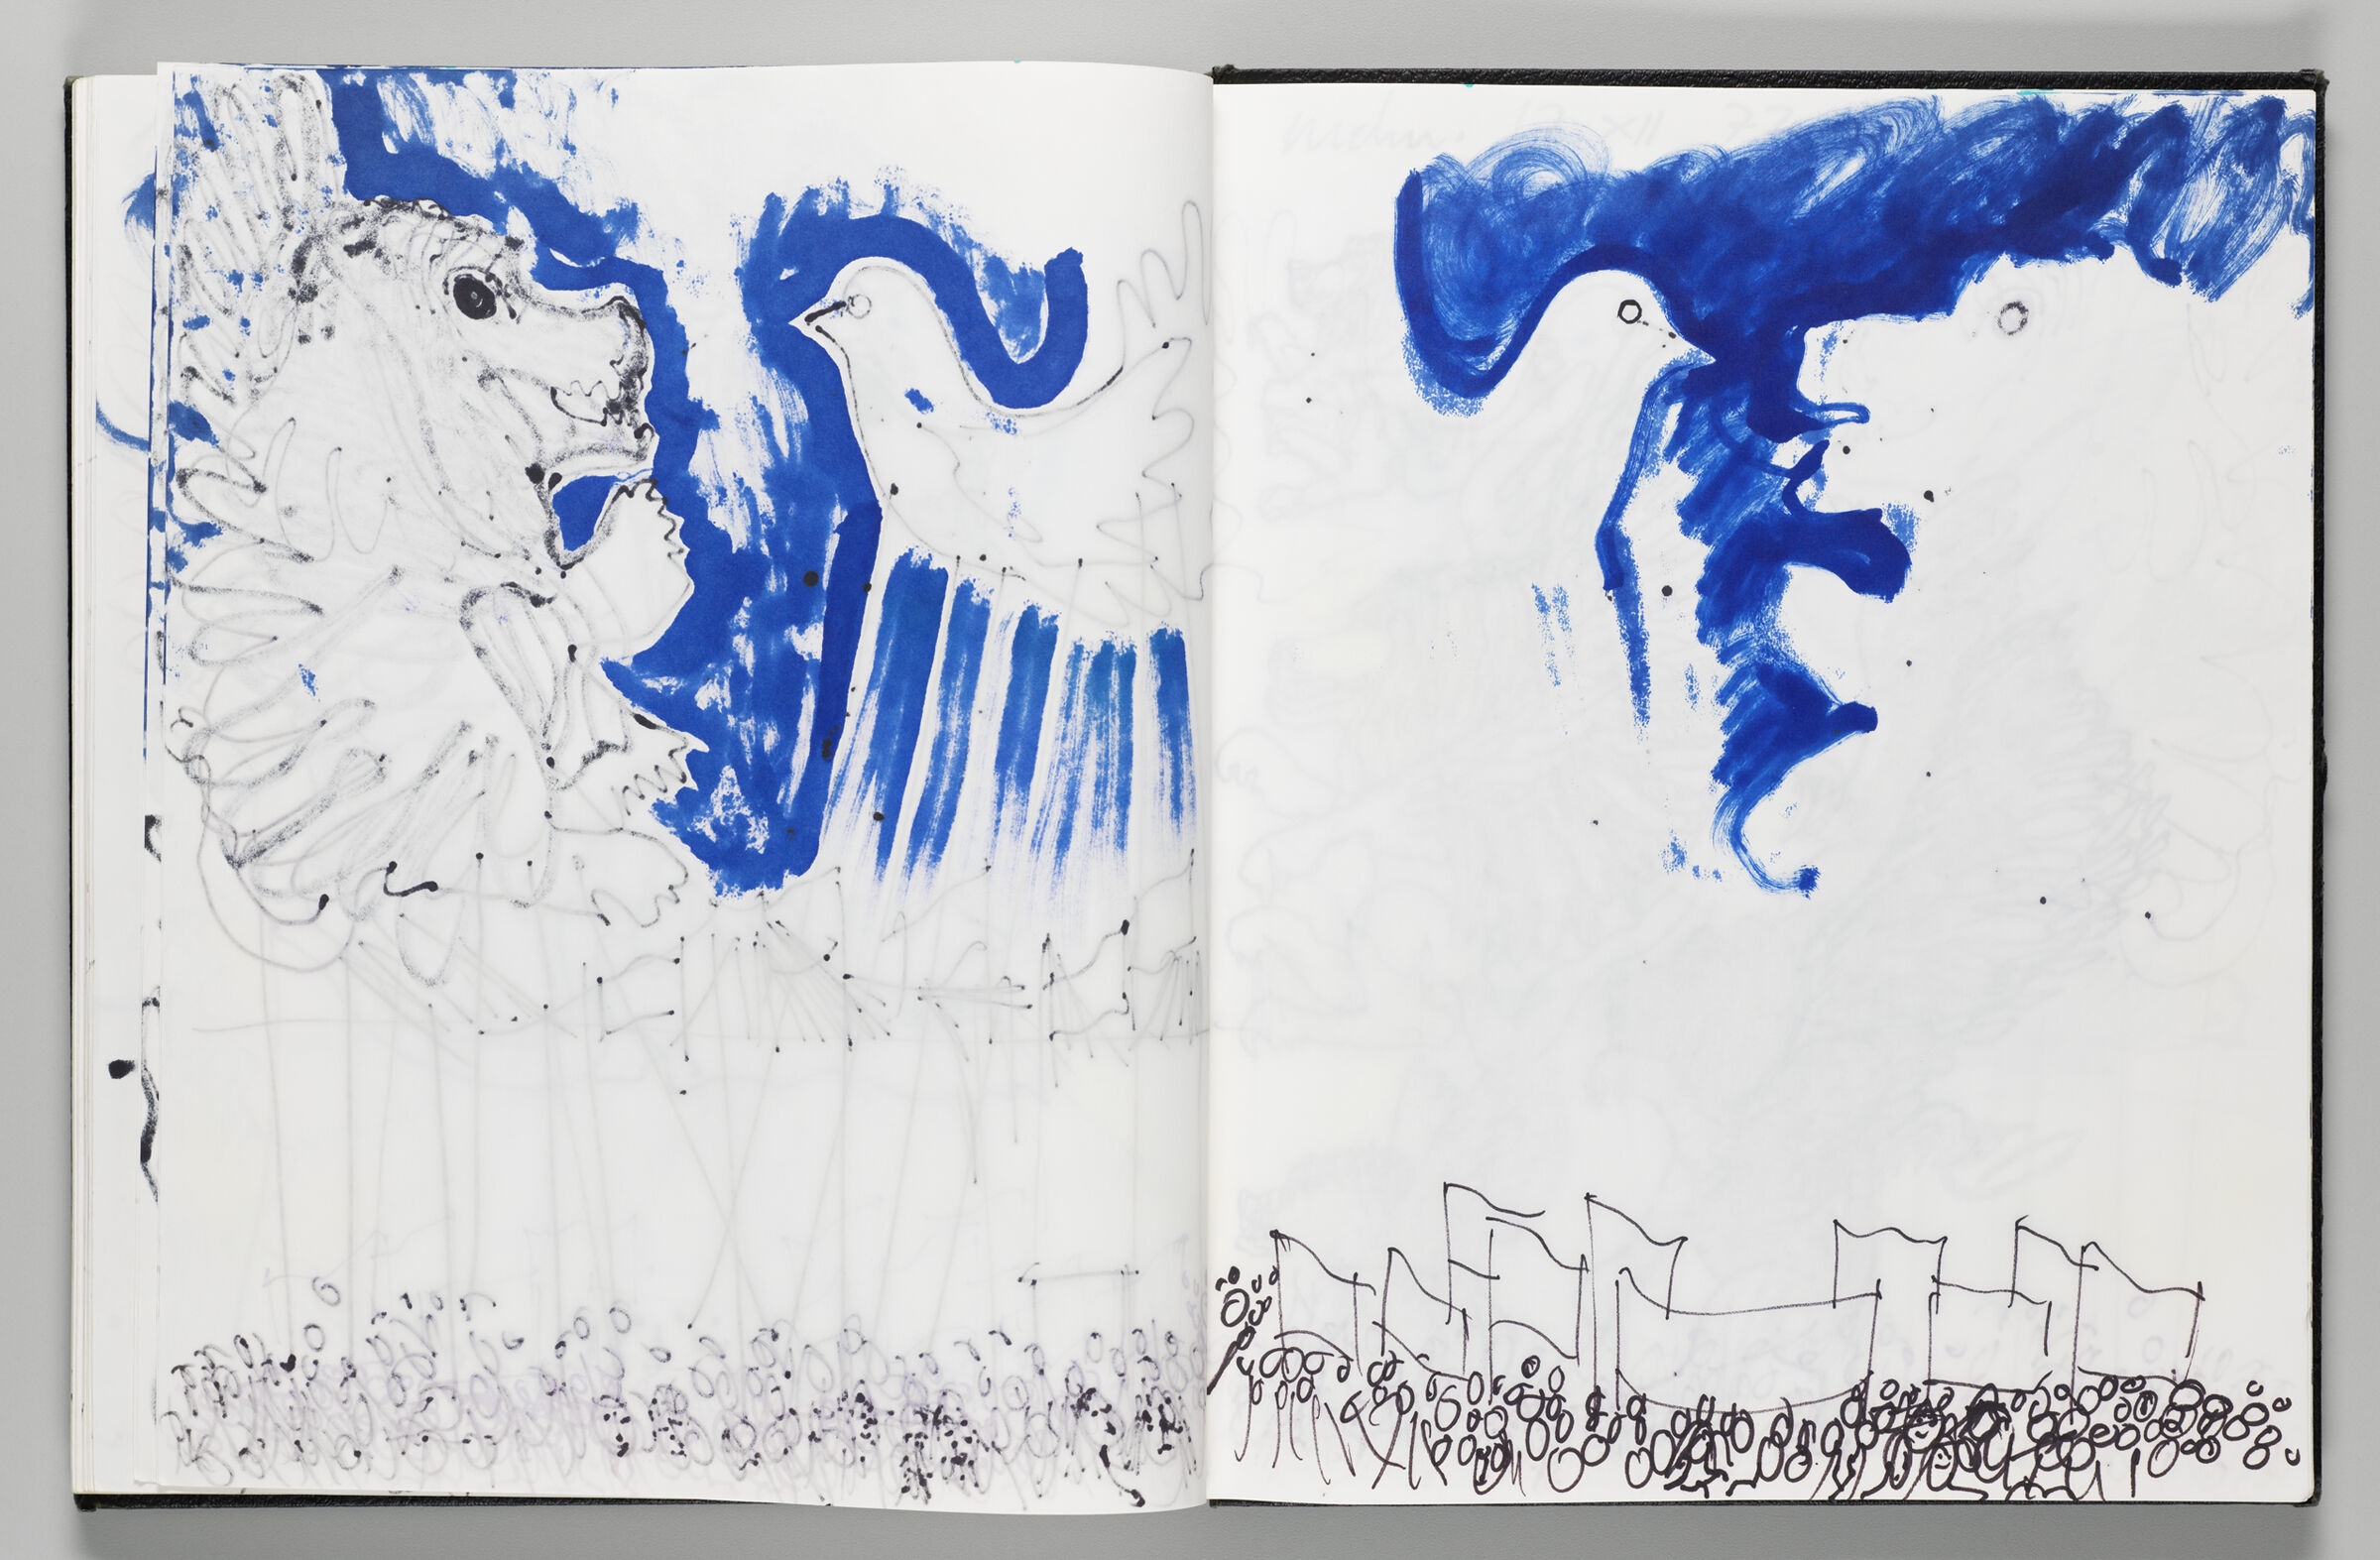 Untitled (Bleed-Through Of Previous Page, Left Page); Untitled (Silhouette Of Winged Lion [Based On Löwenbrau Logo] And Bird Inflatables Using Color Transfer For Outline, Right Page)